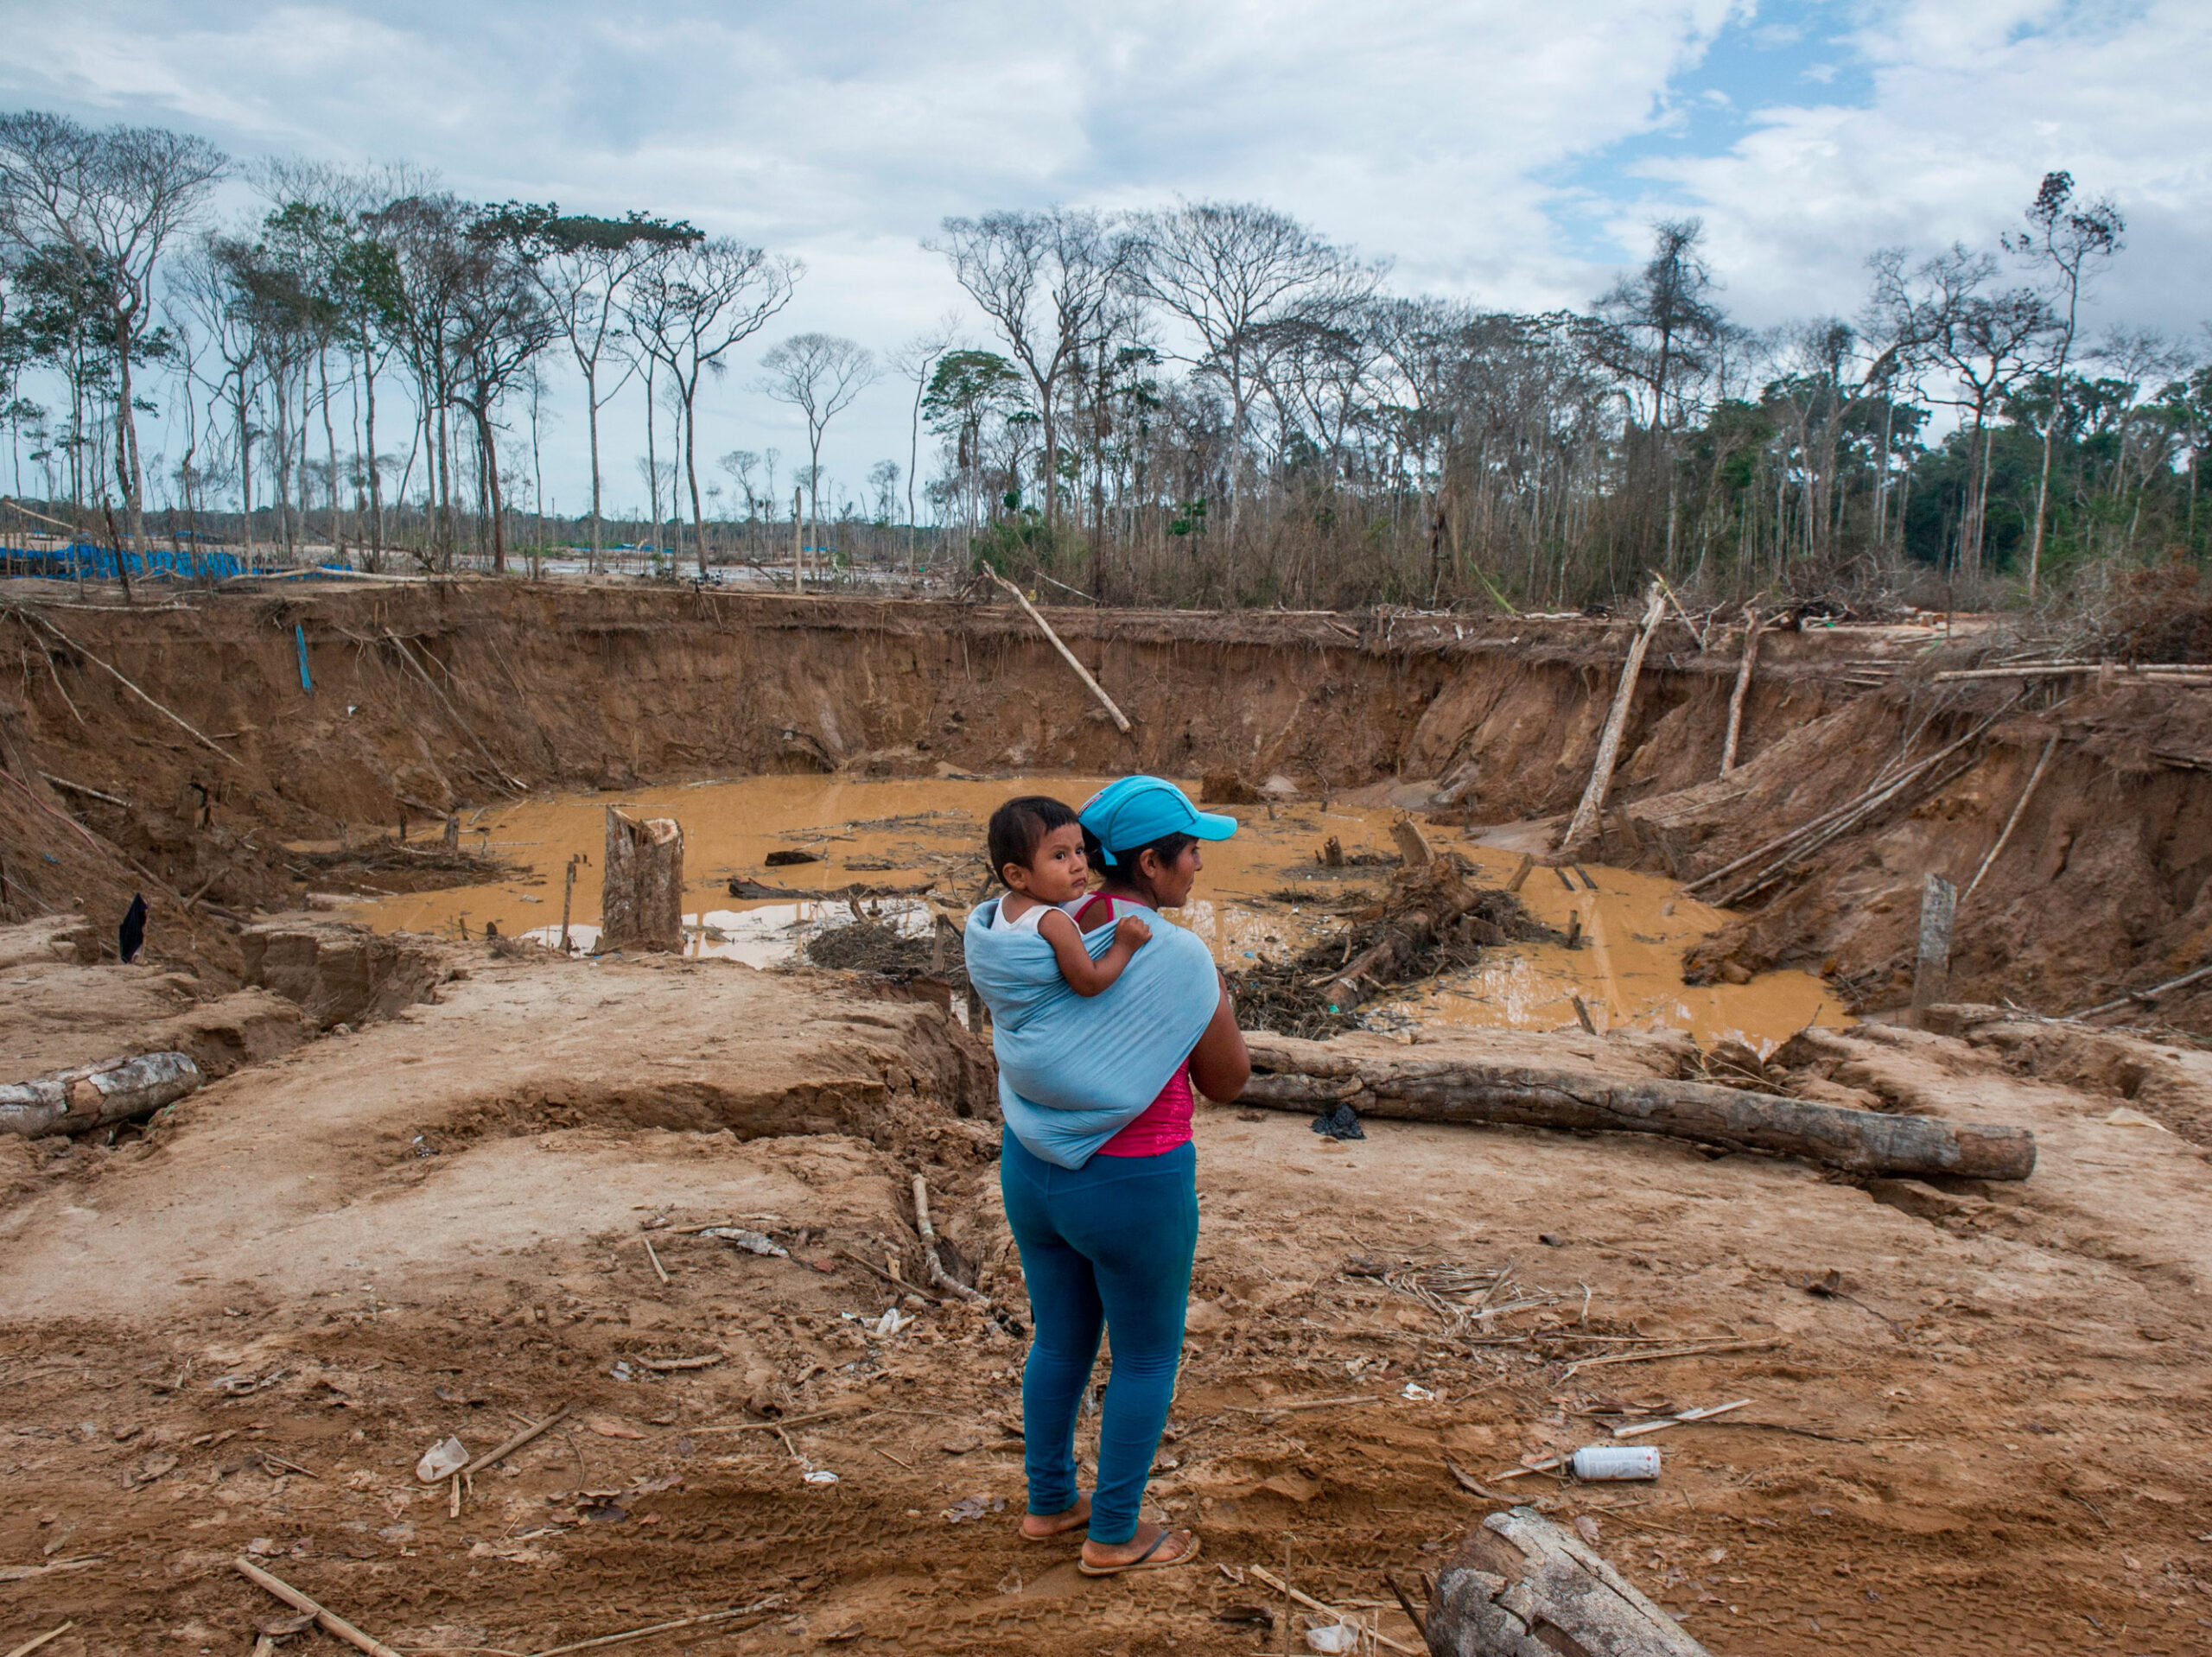 Gold mining reduced this Amazon rainforest to a moonscape. Now miners are restoring it